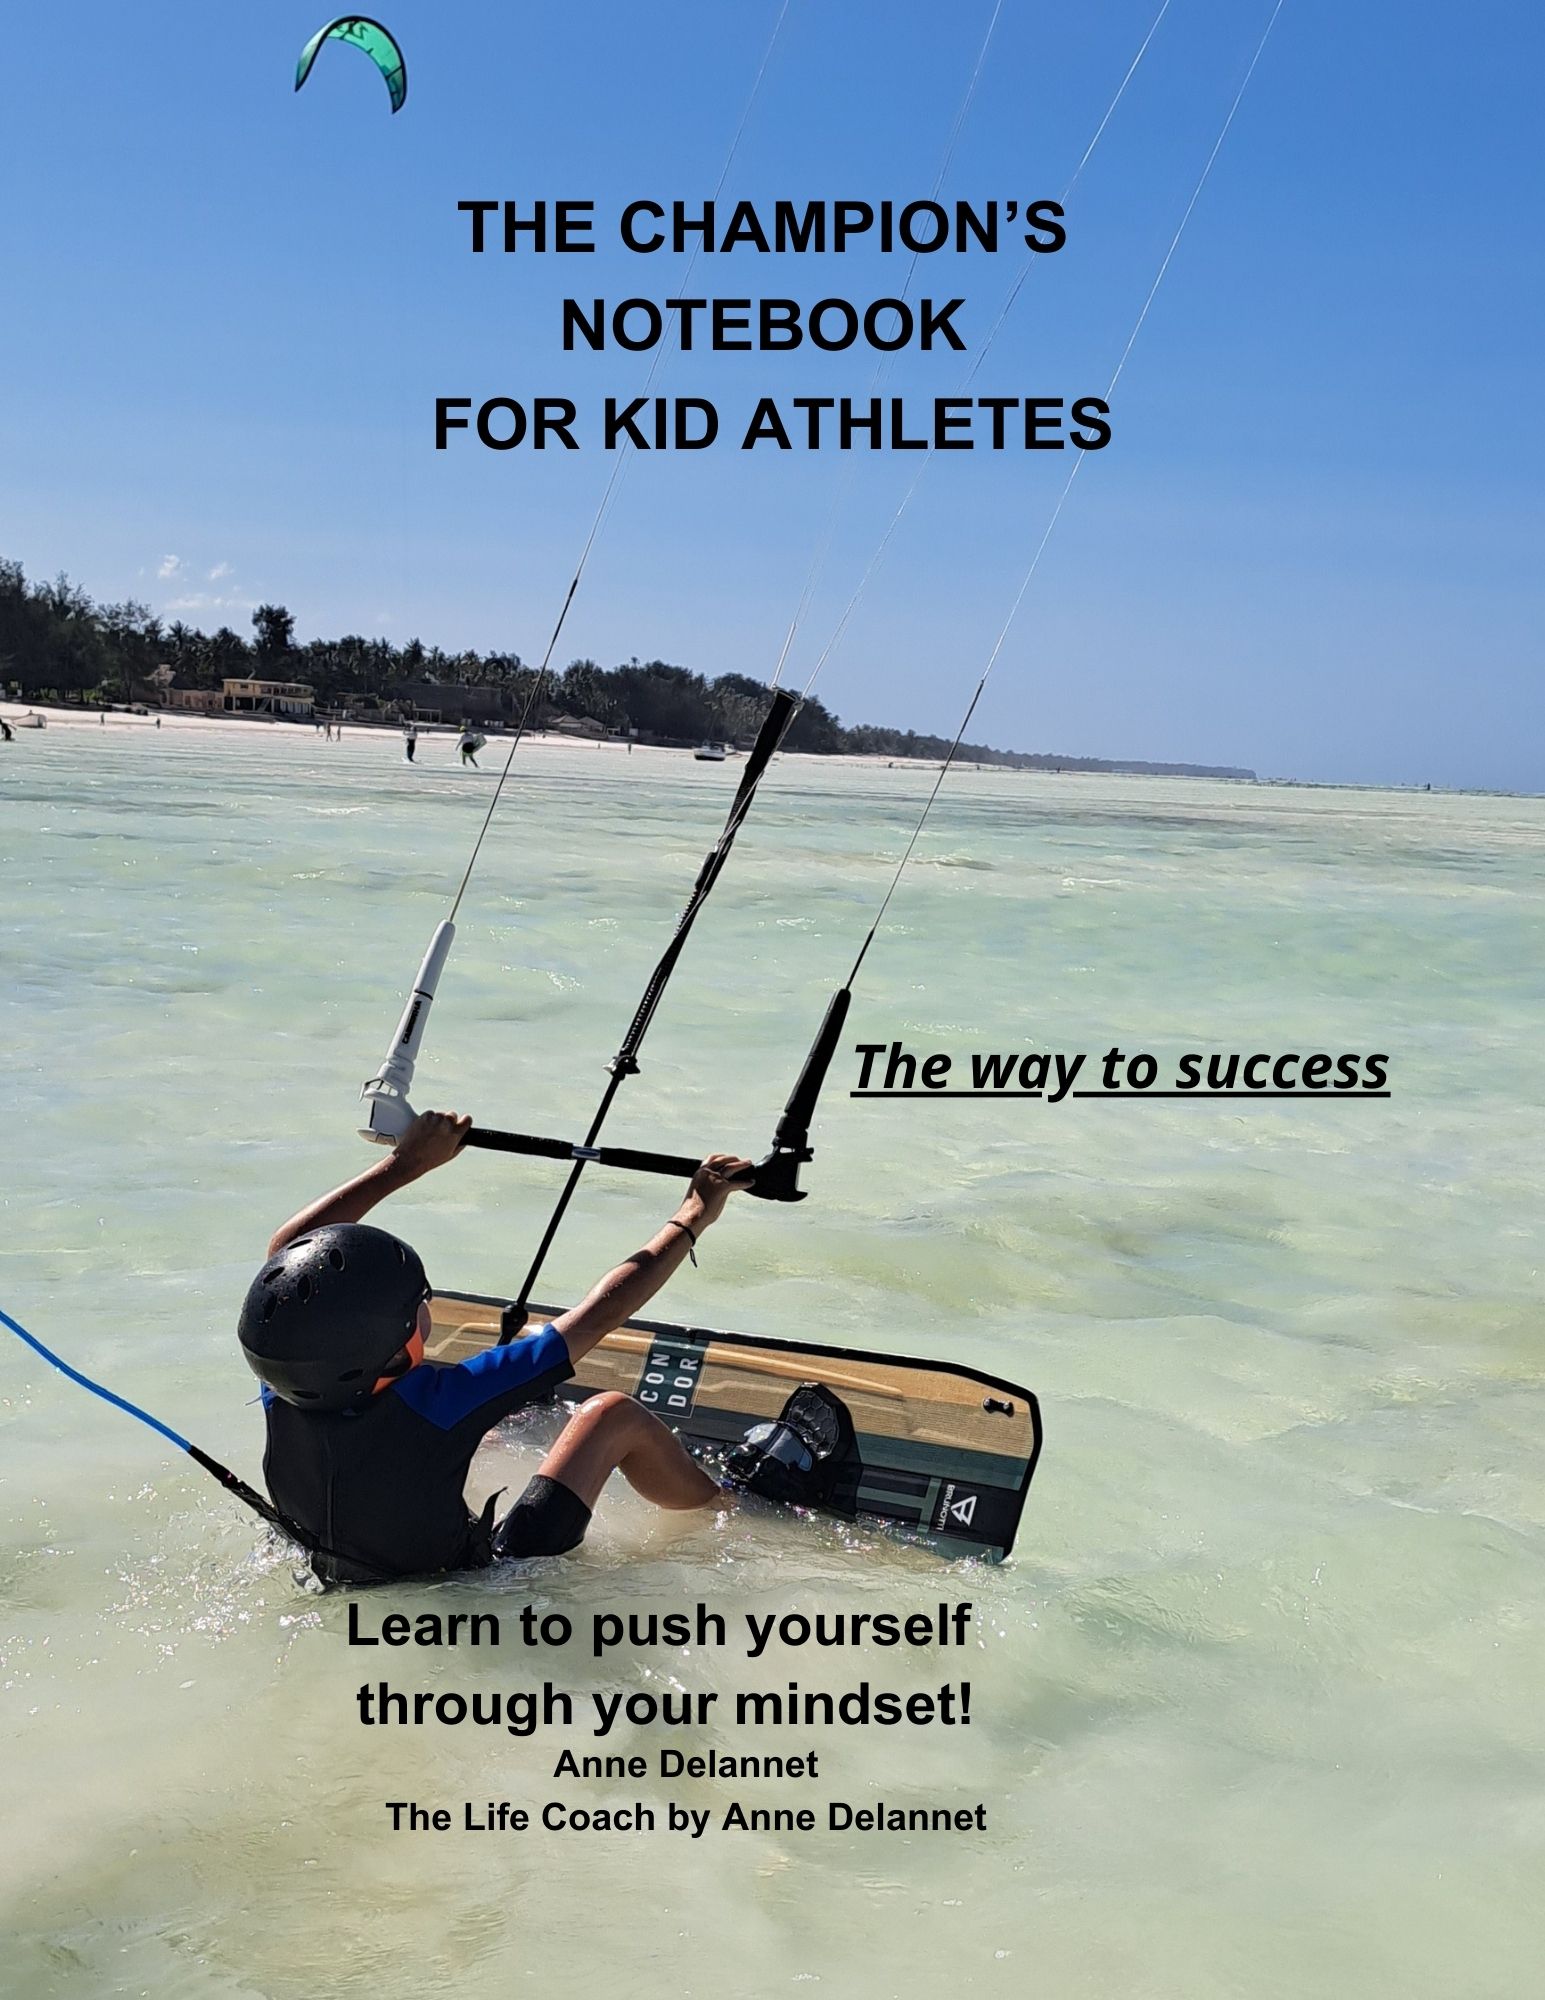 THE CHAMPION’S NOTEBOOK FOR KID ATHLETES-ENG V- (1)